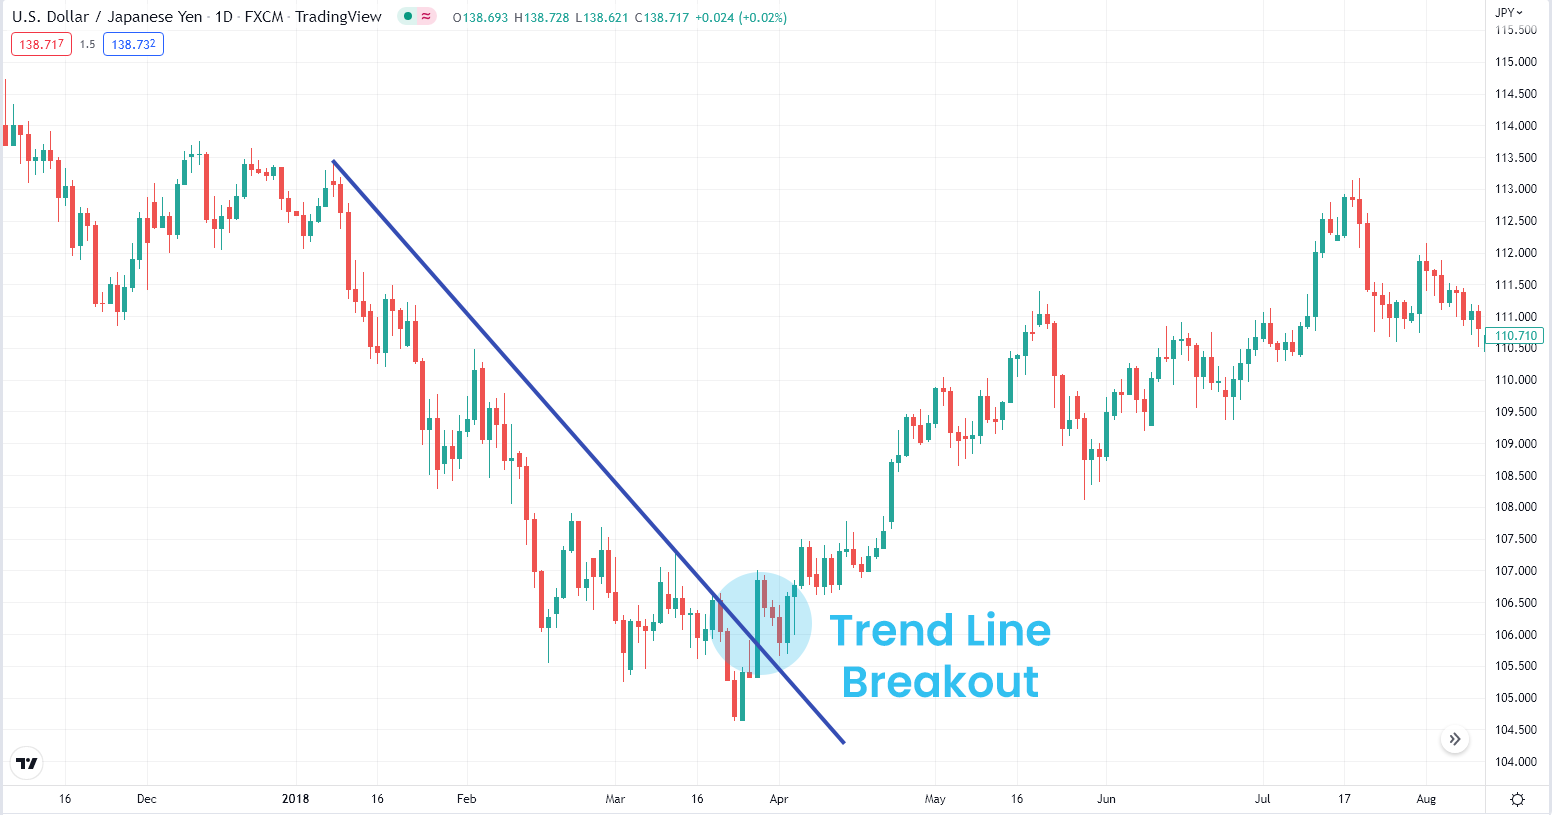 How to Trade Breakouts Using Triangles, Channels and Trend Lines